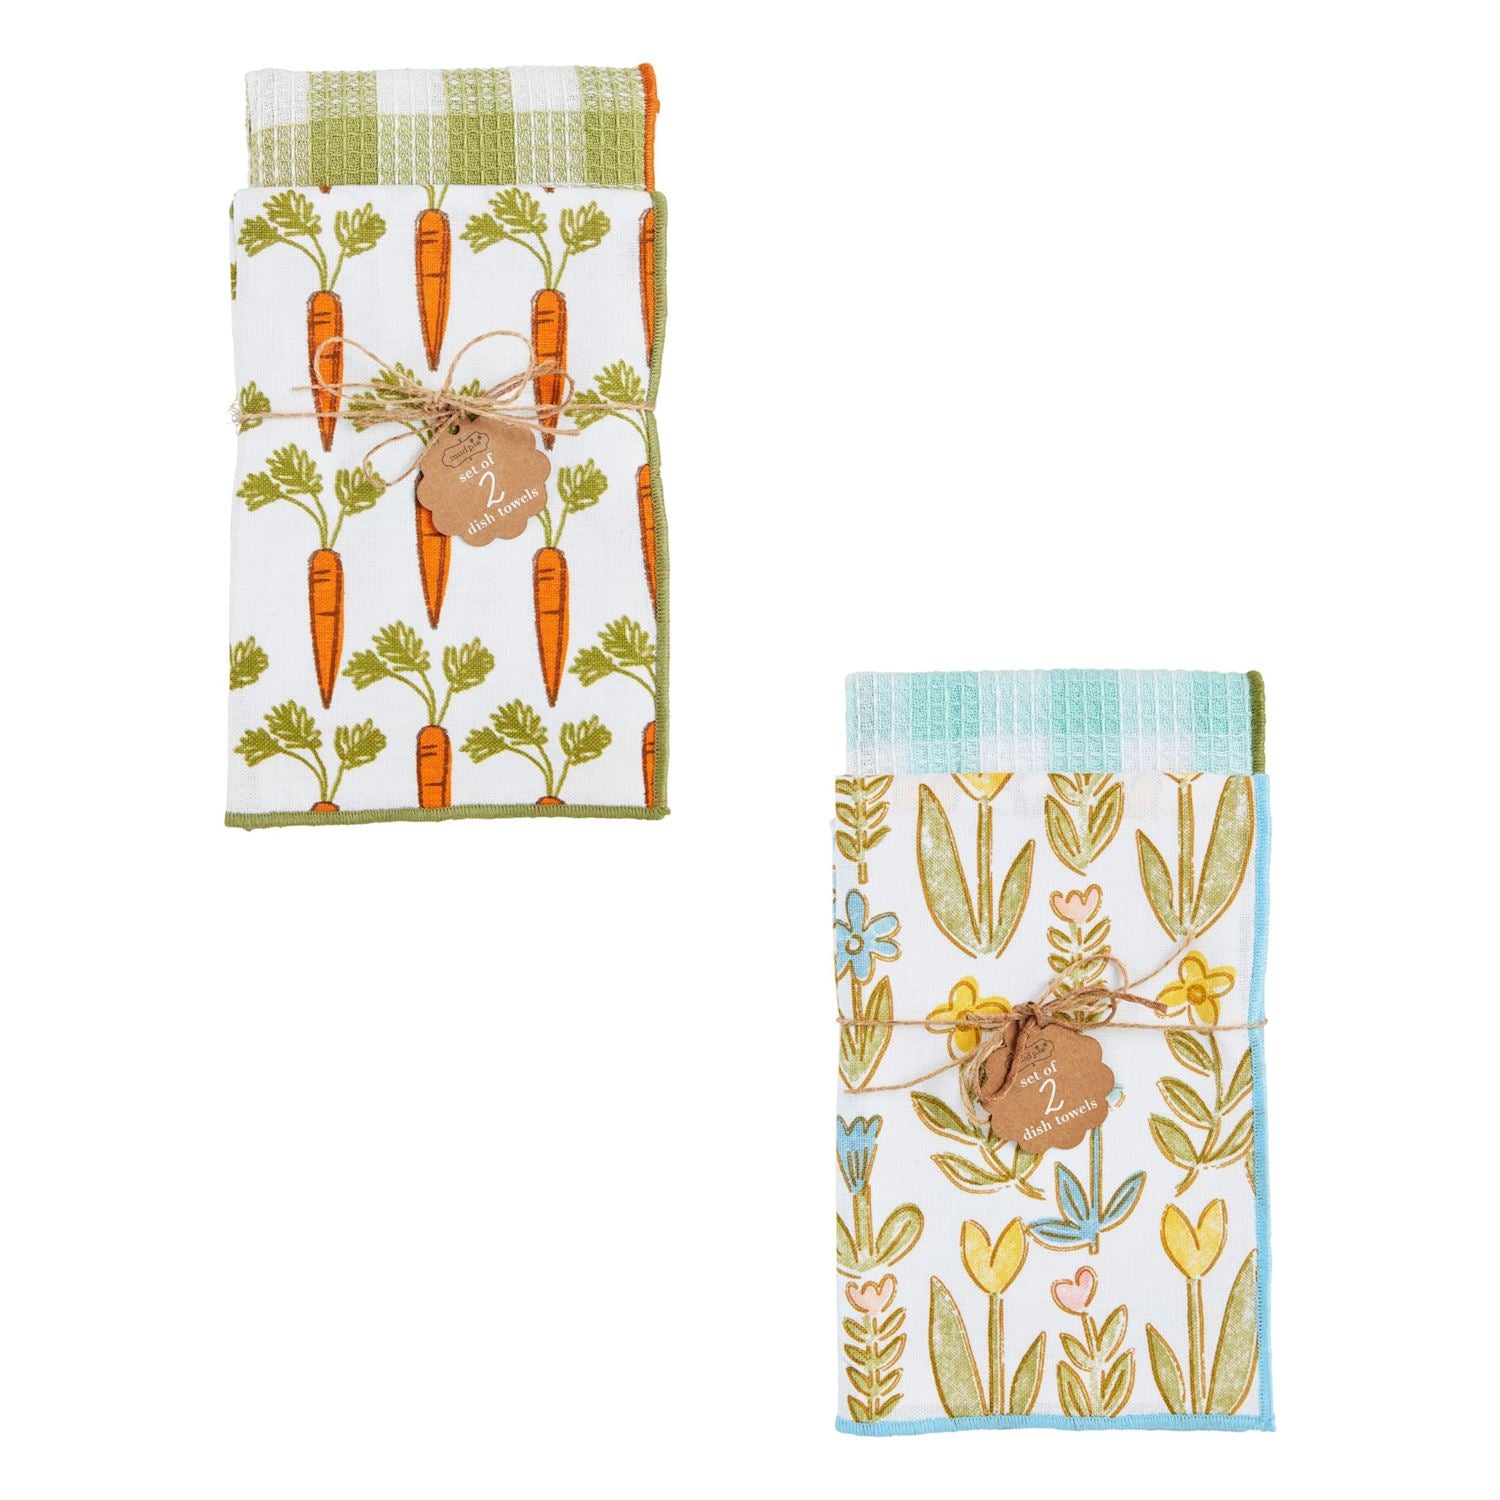 both styles of spring towels sets on a white background.